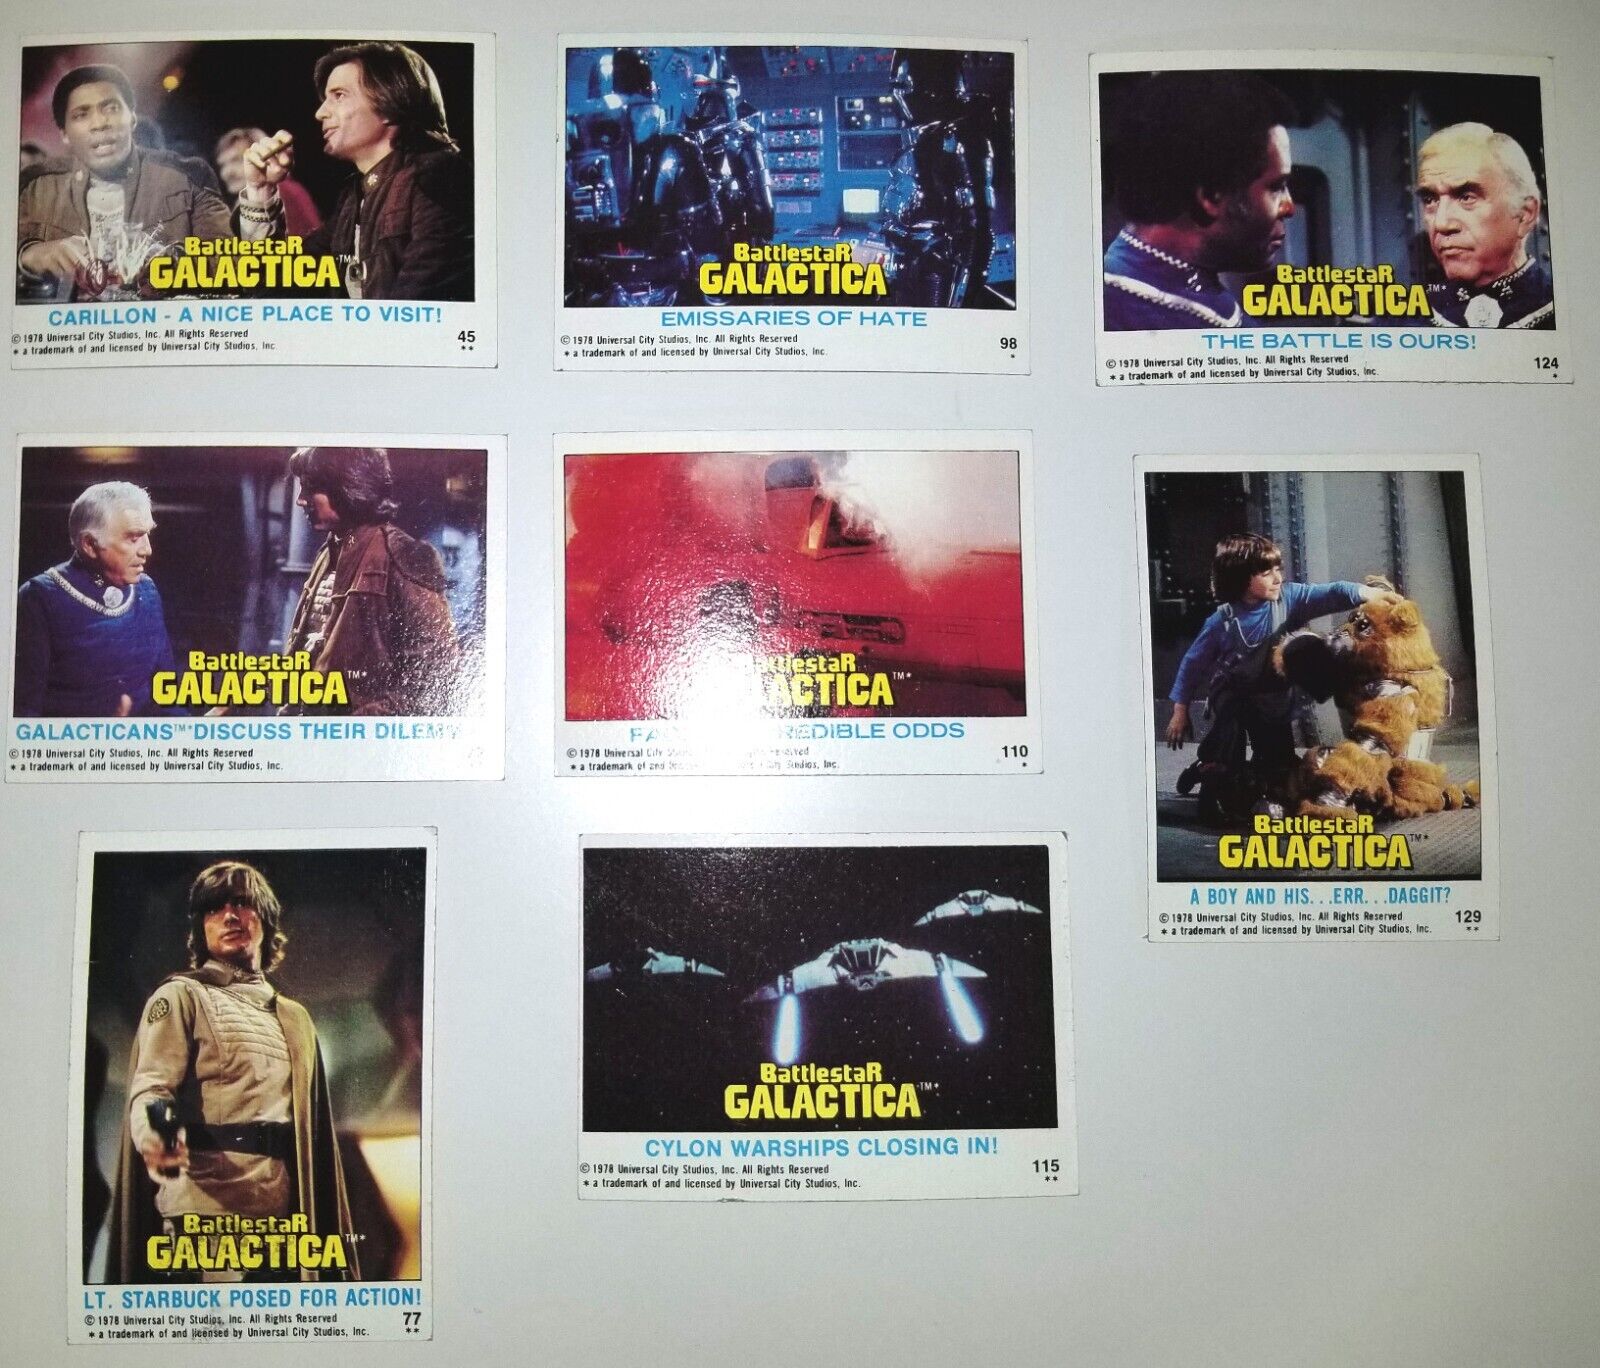 Battlestar Galactica 1978 Topps Cards - Lot of 8 Cards - EX/NM - NM